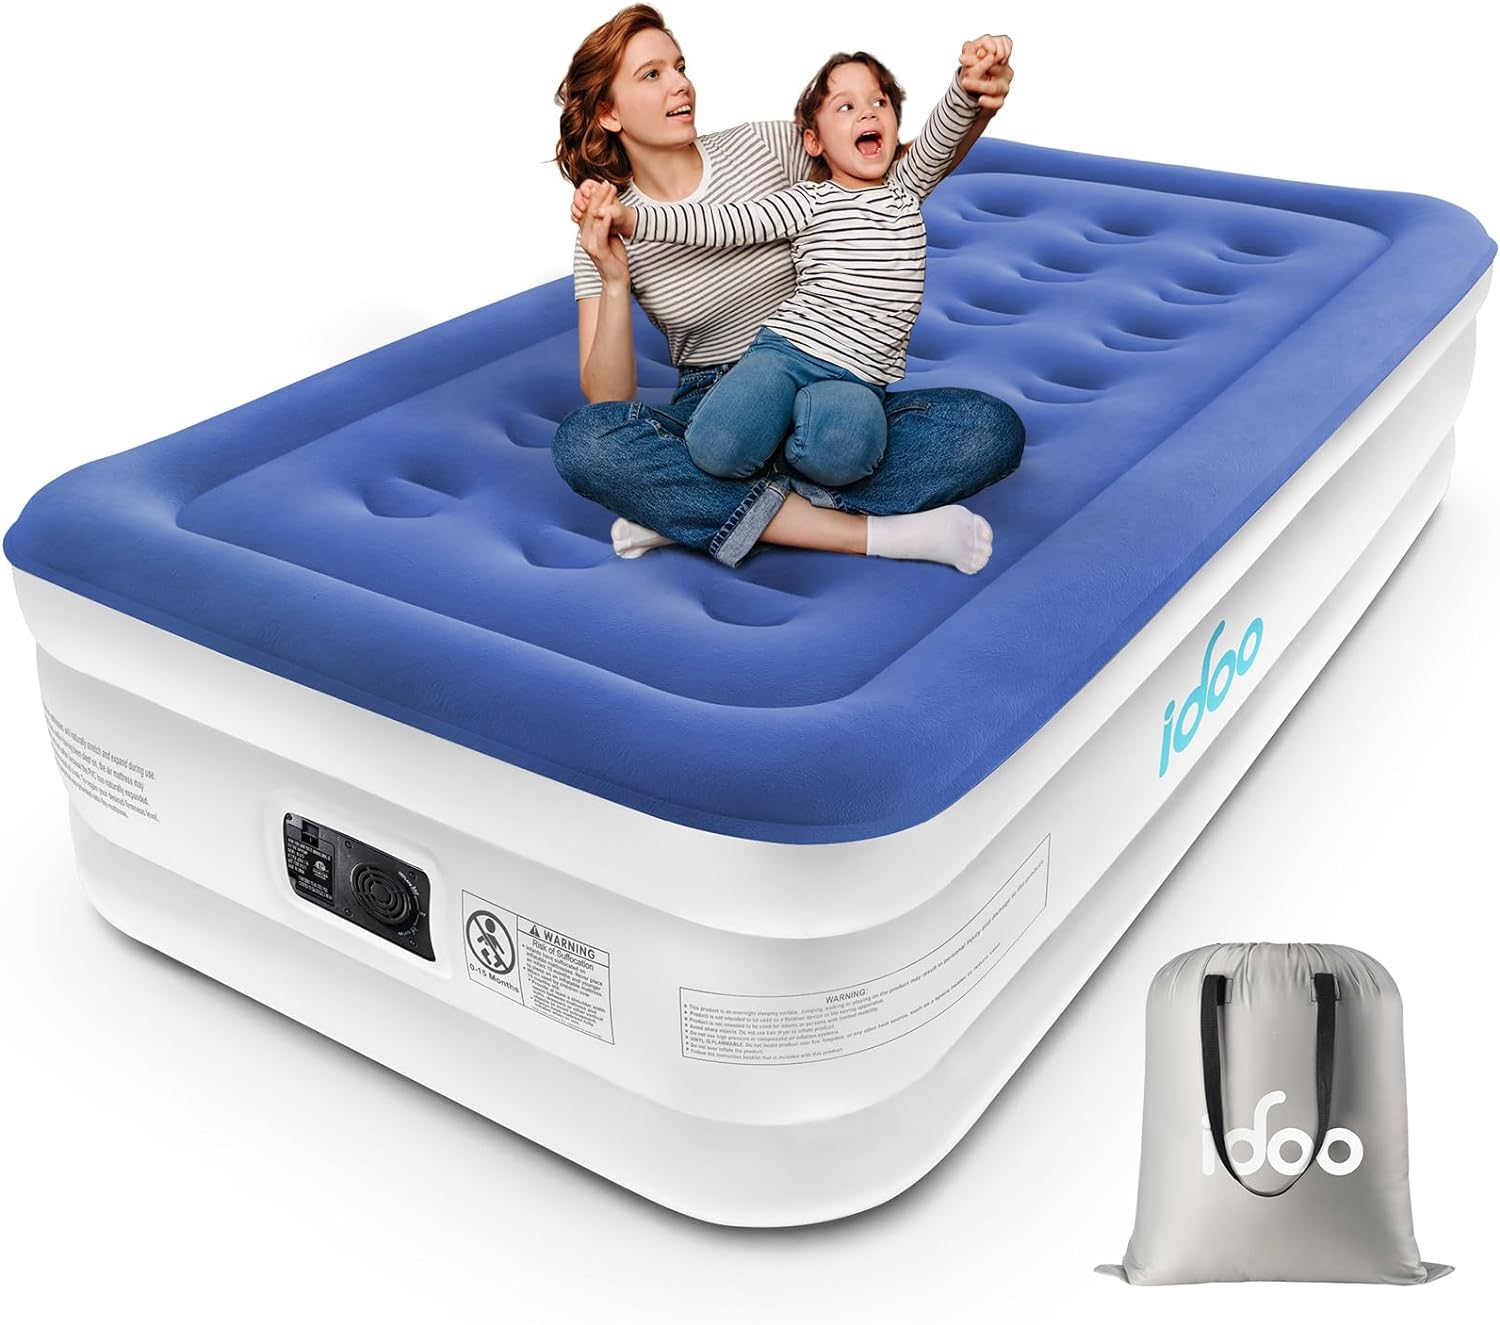 iDOO Single Air Bed, Inflatable Bed with Built-in Electric Pump